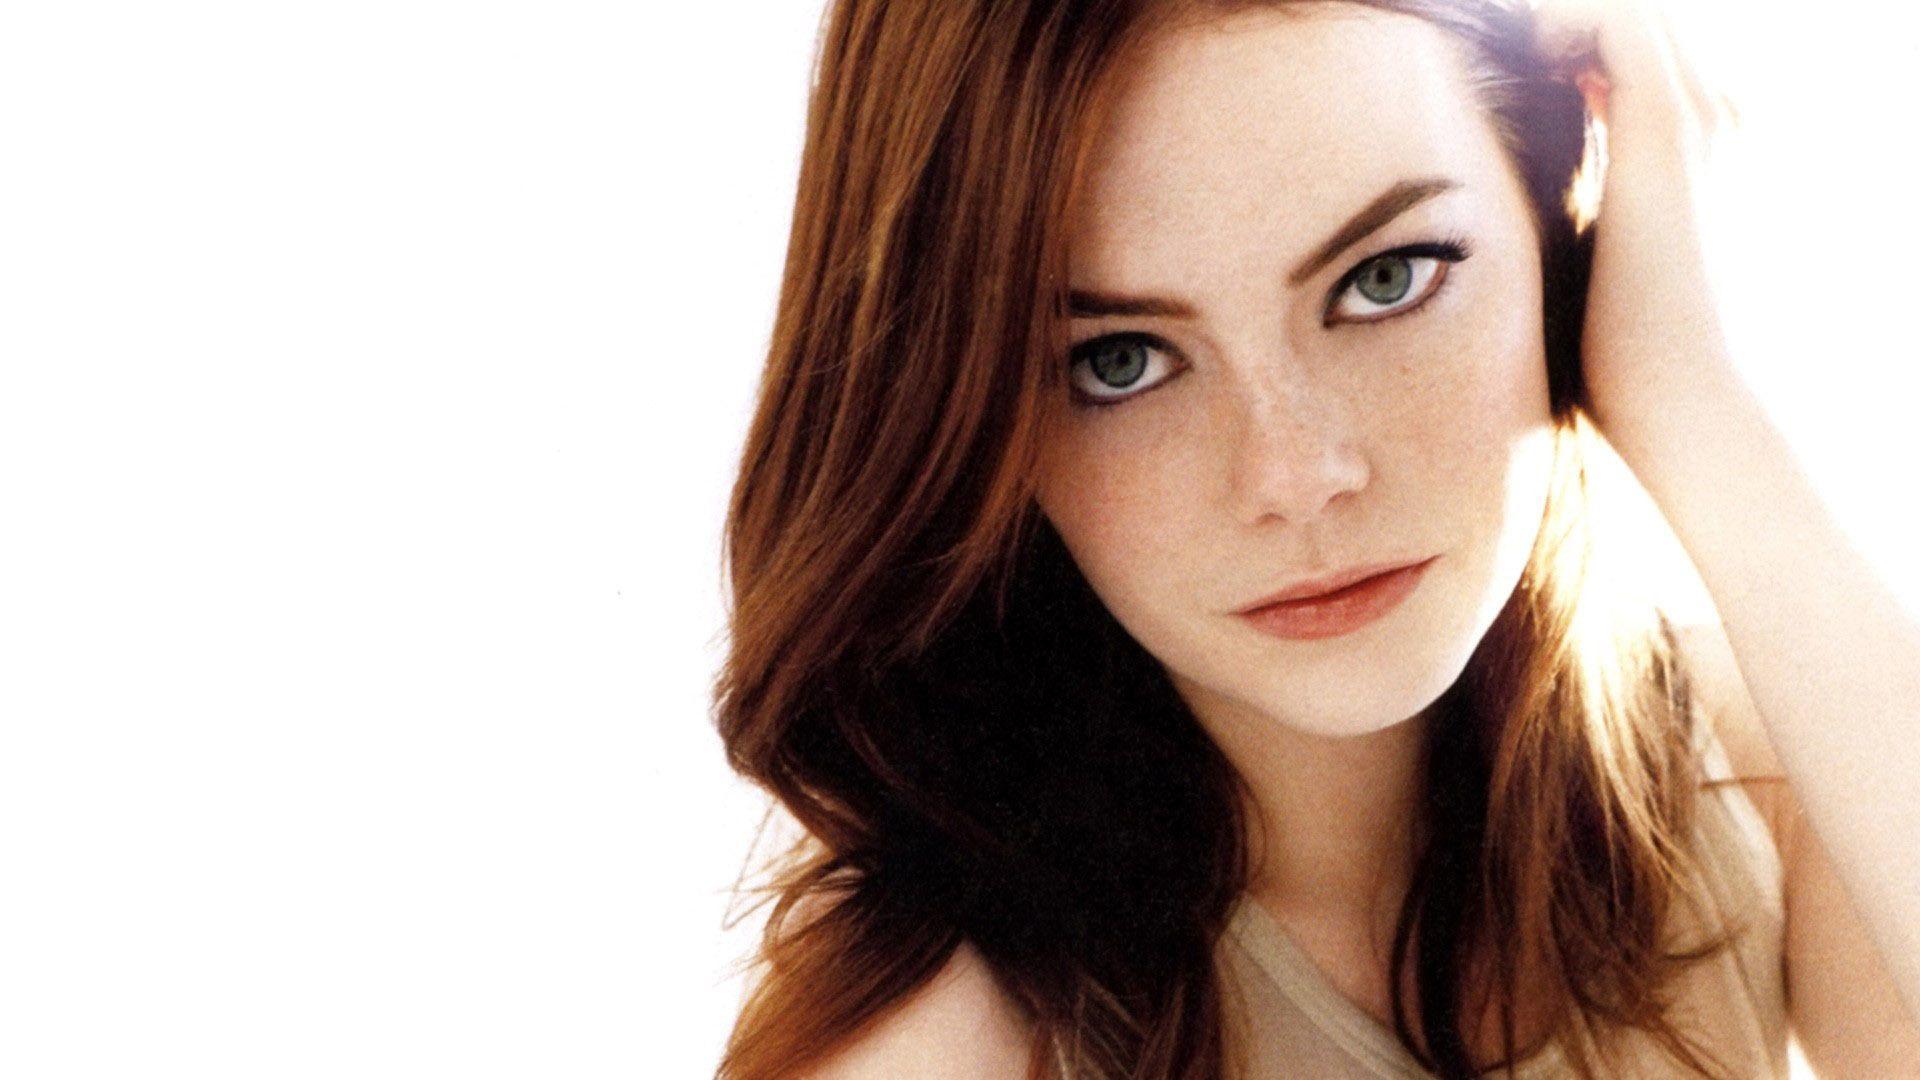 Emma Stone 1080p Wallpapers.